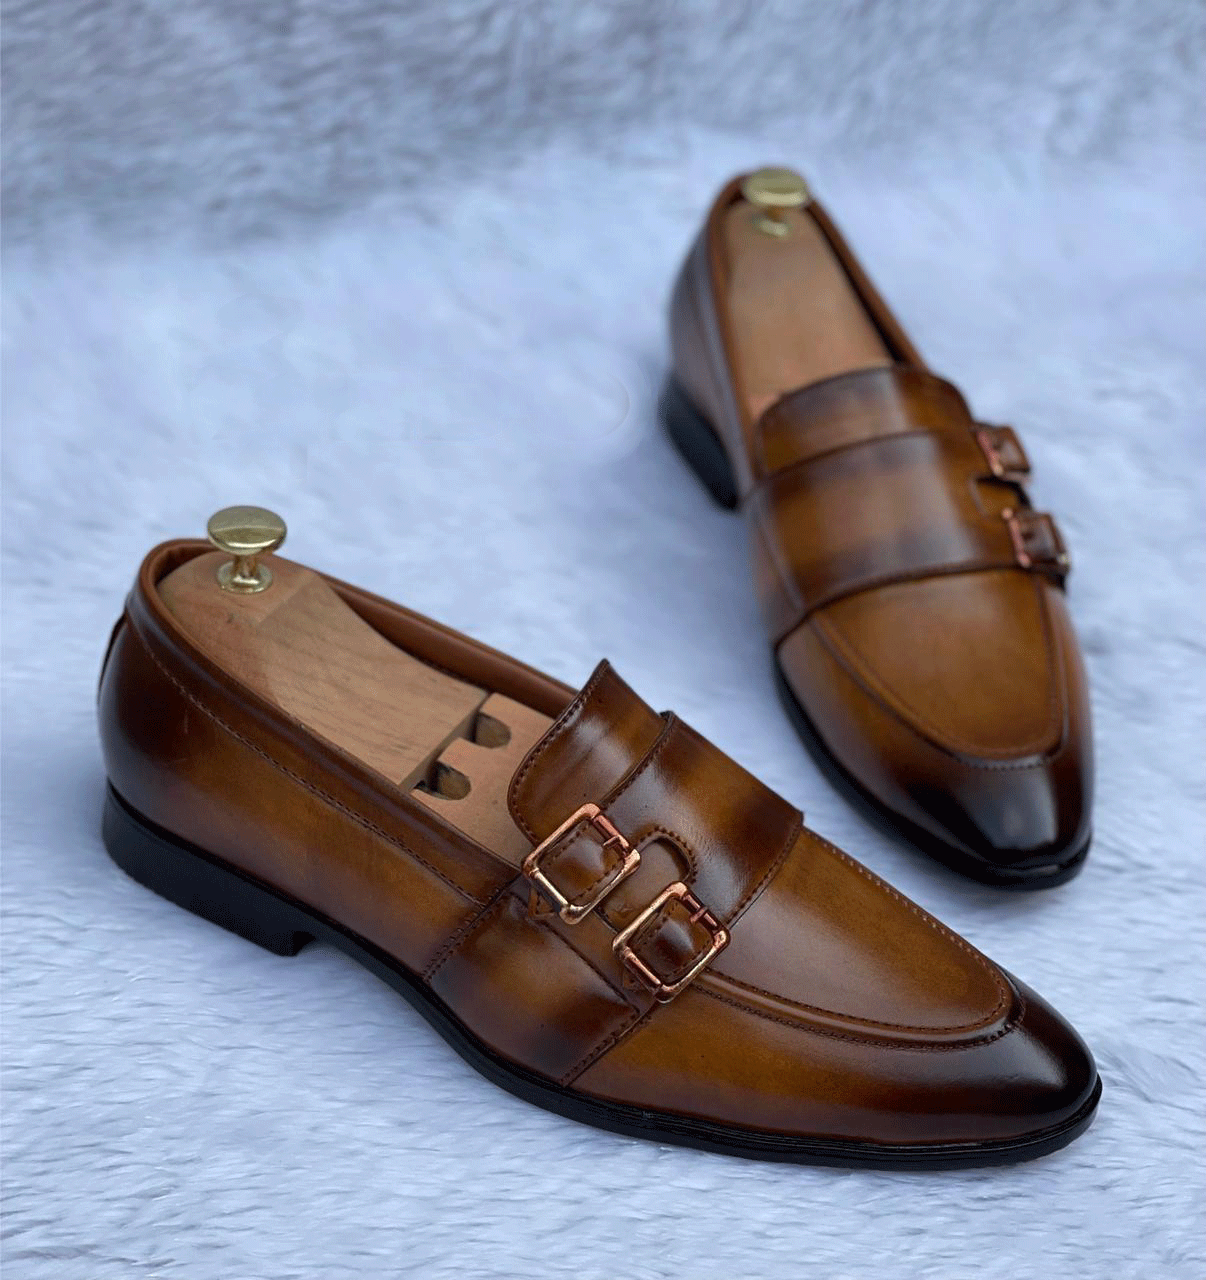 Fashionable Casual Wear Party Wear Loafer Shoes For Men-Unique And Classy